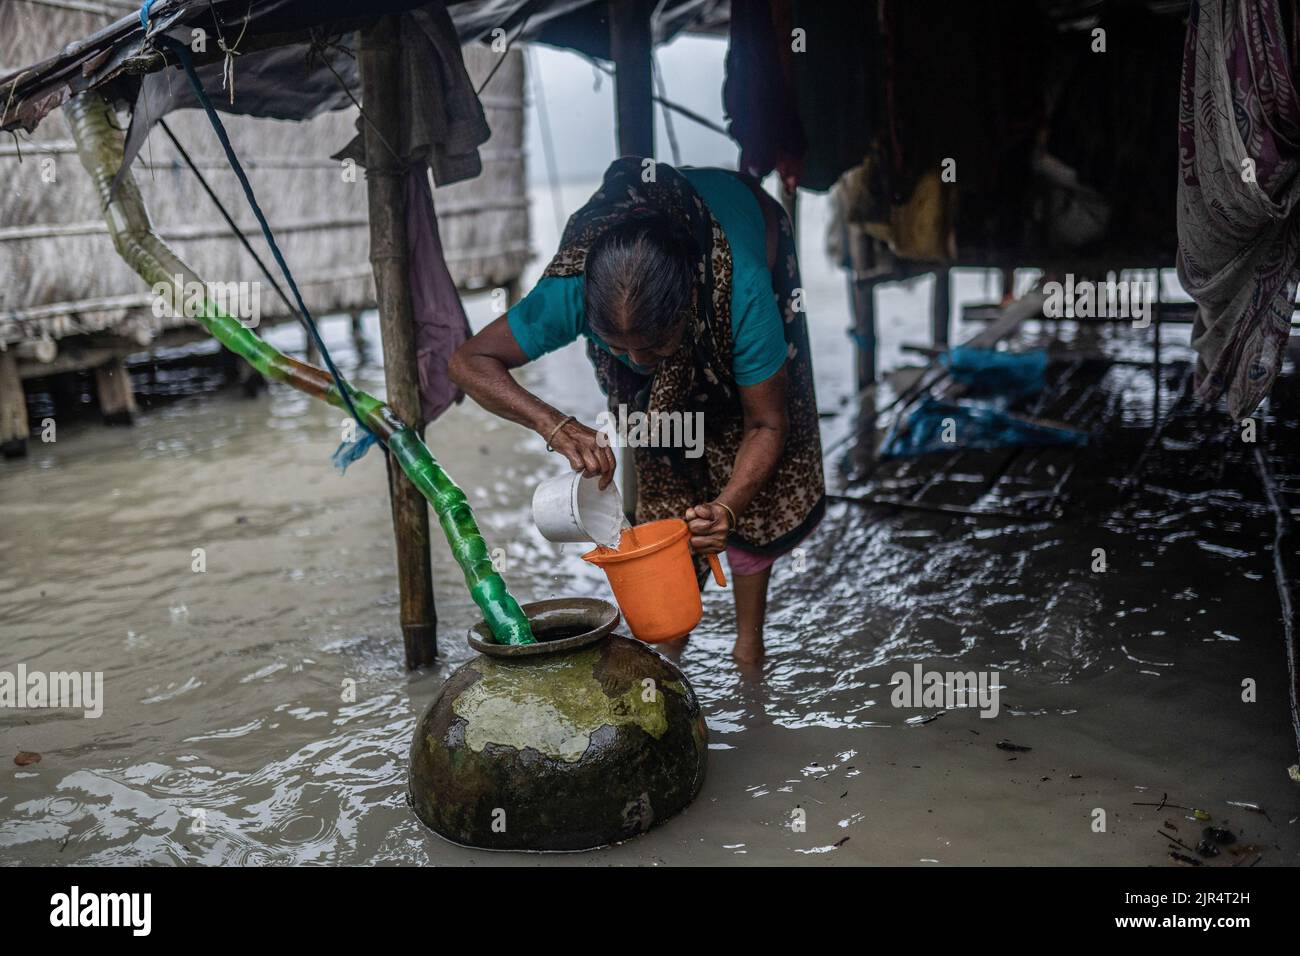 A woman tries to fill up her mag from the rainwater which comes from the pet bottle-made pipe at Kalabogi village in Khulna. Not too long ago Kalabogi, a coastal village in Bangladesh, was full of cultivable land until the rising sea levels began to swallow the area all the way up to the Bay of Bengal. Frequent cyclones and floods hit the village since the late 1990s. In 2009, a major cyclone named Aila destroyed the country's 1,400 kilometres of embankments, 8,800 kilometres of roads, and about 3, 50,000 acres of farmland. Several hundred people were reportedly killed in the disaster. The far Stock Photo